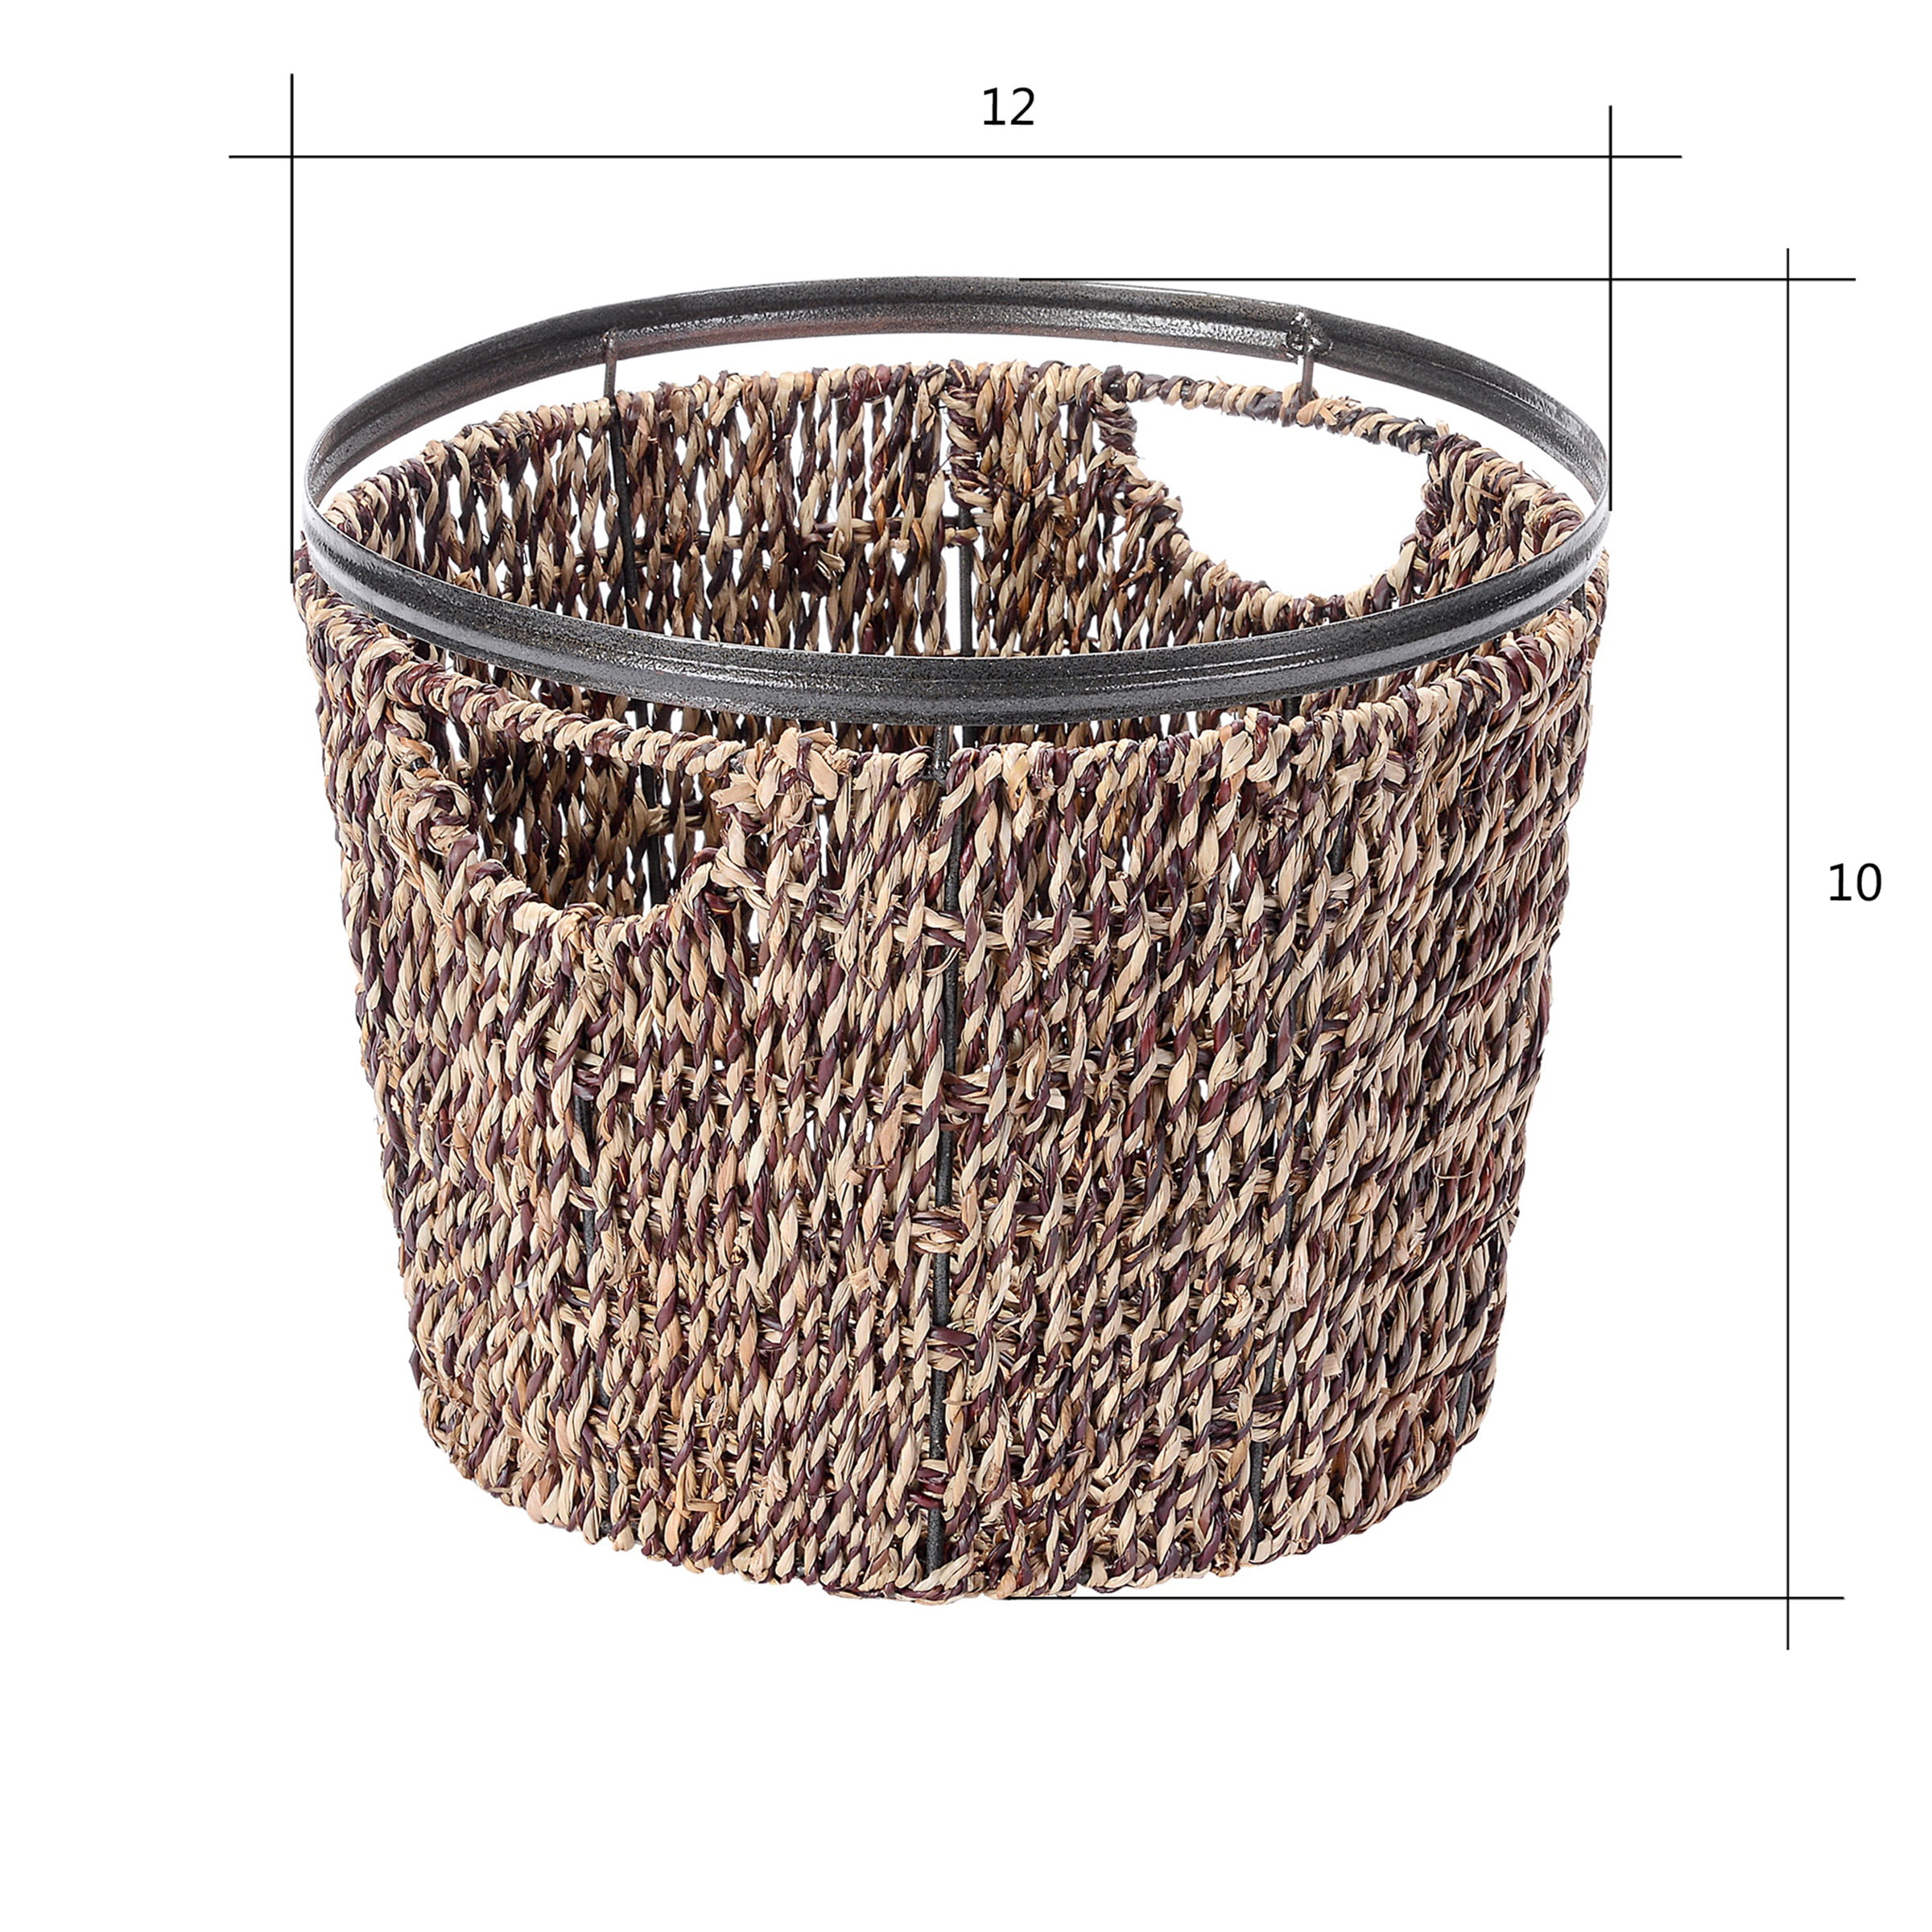 Toy and Miscellaneous Items Water Hyacinth Basket D12 x H8 Crafts Artera Round Handwoven Wicker Basket for Plant 